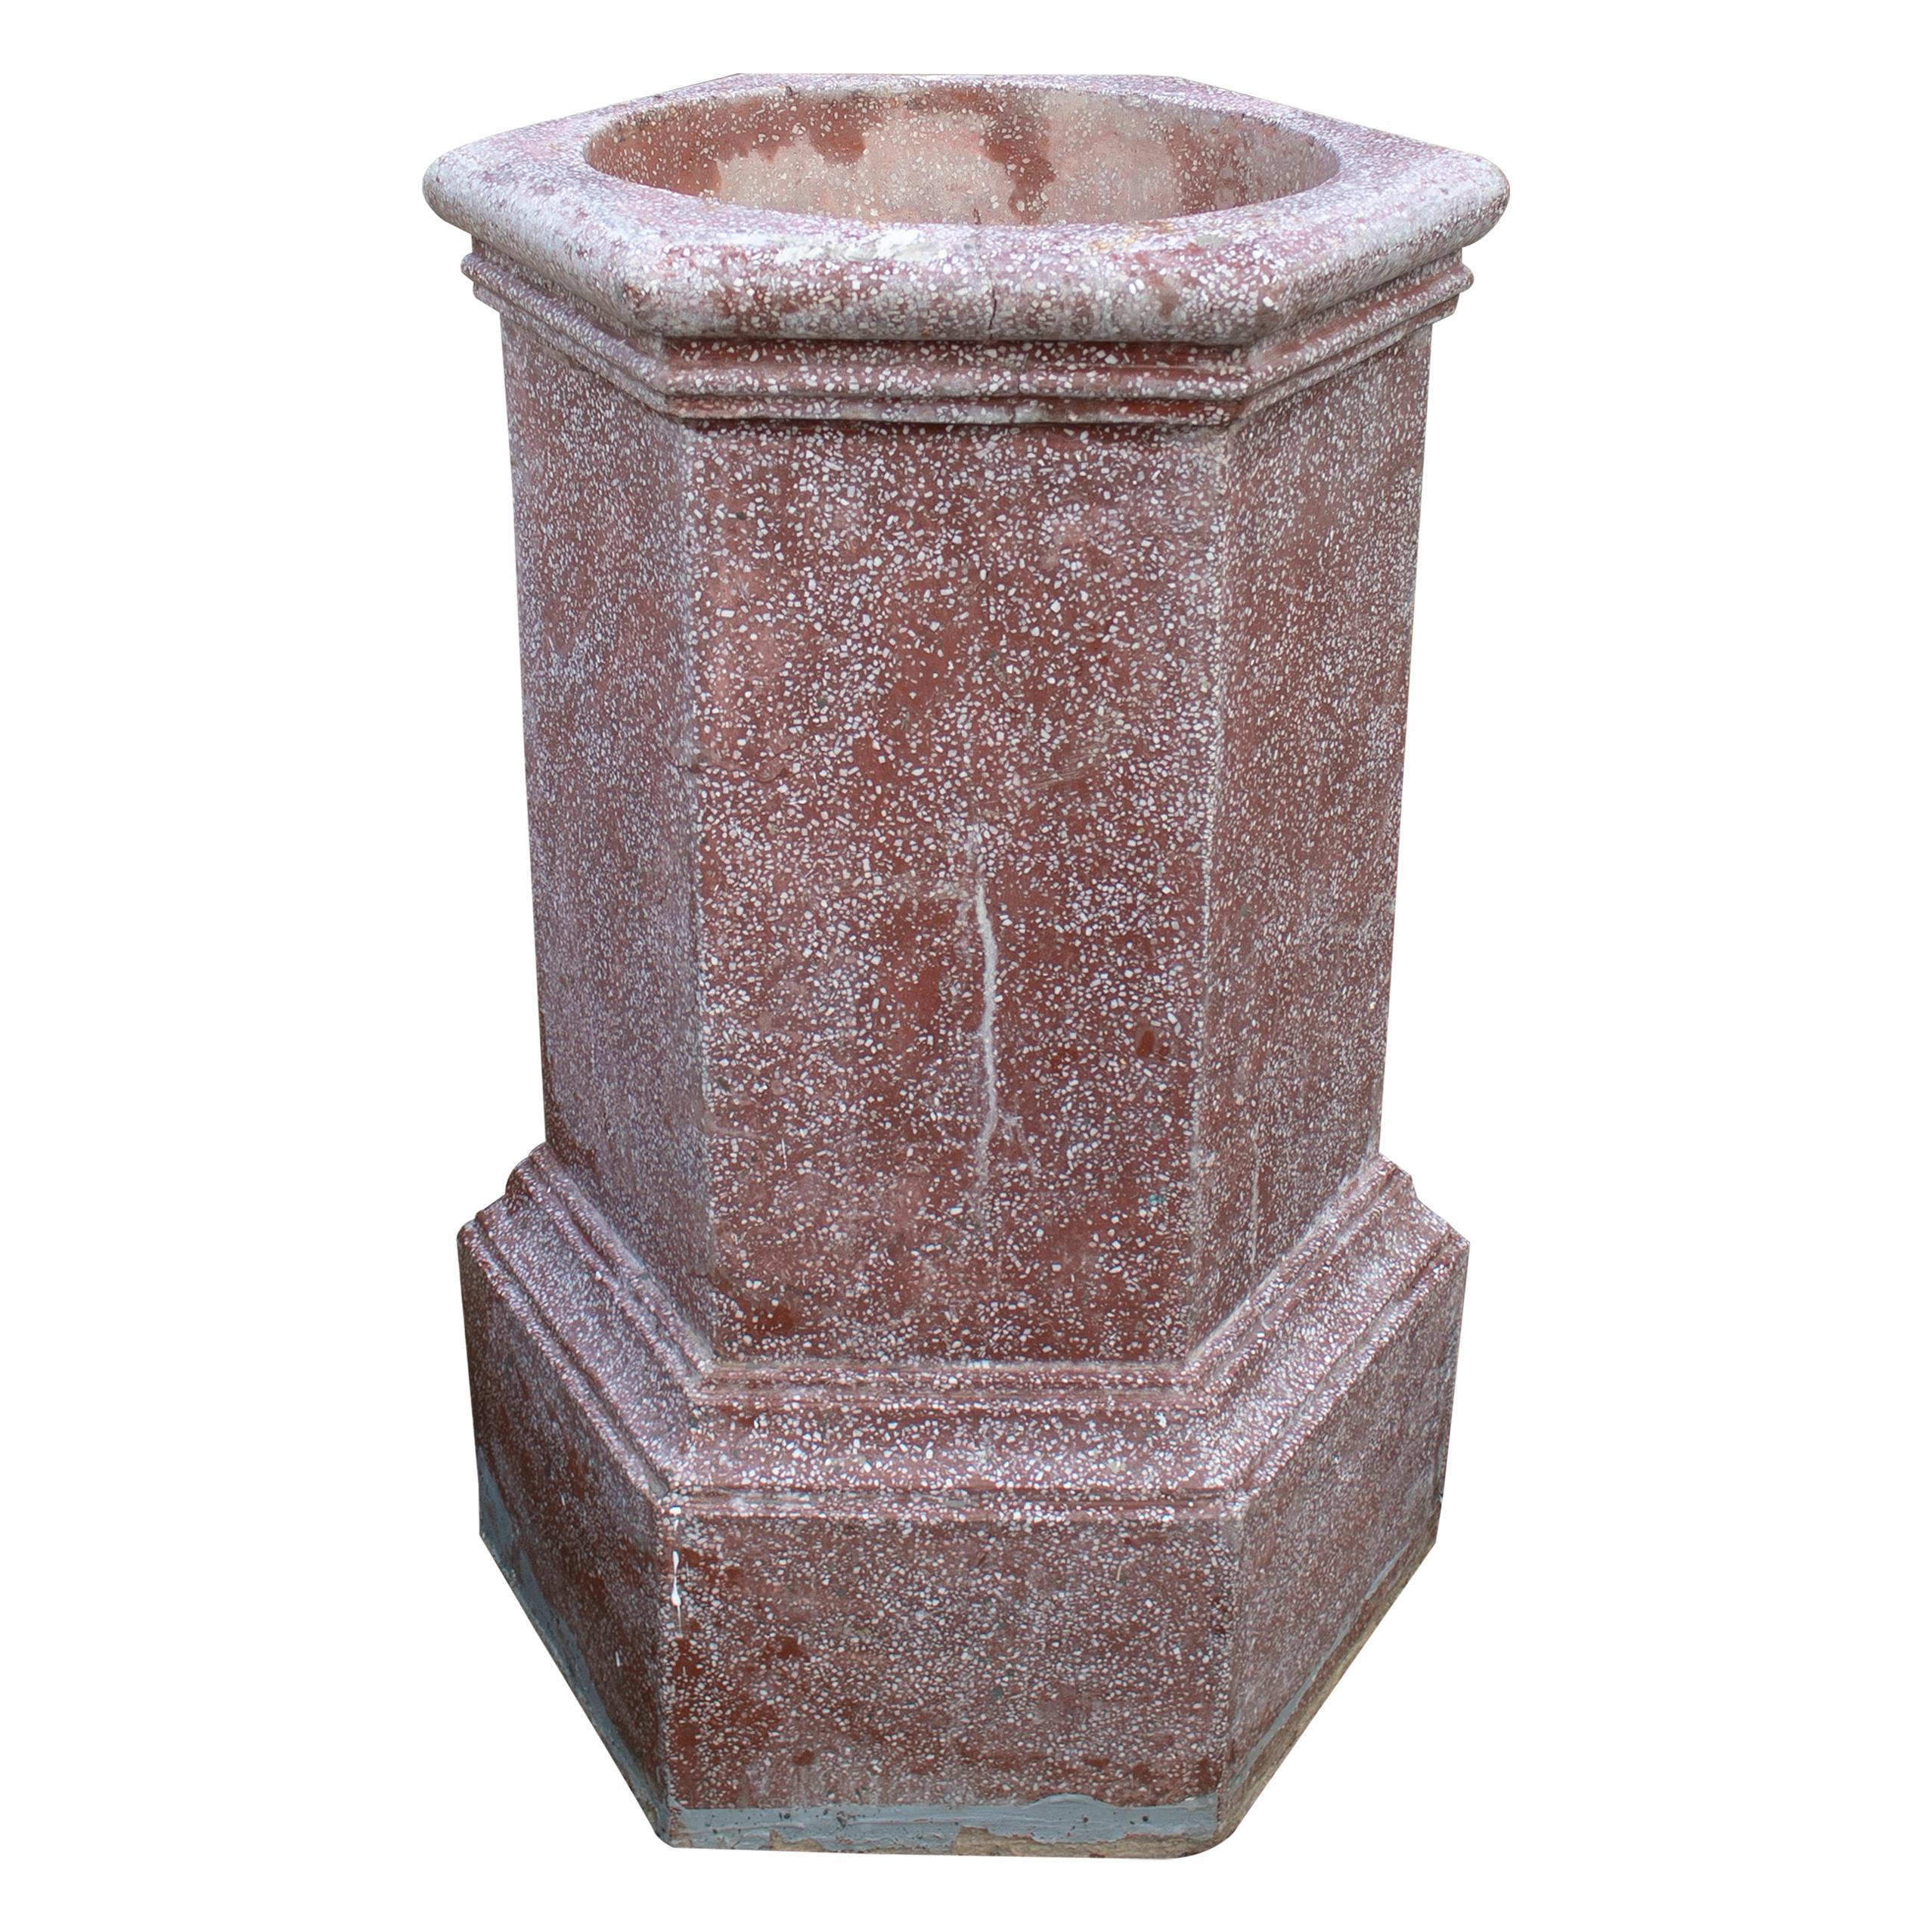 1950s Spanish Red Reconstituted Stone Wellhead